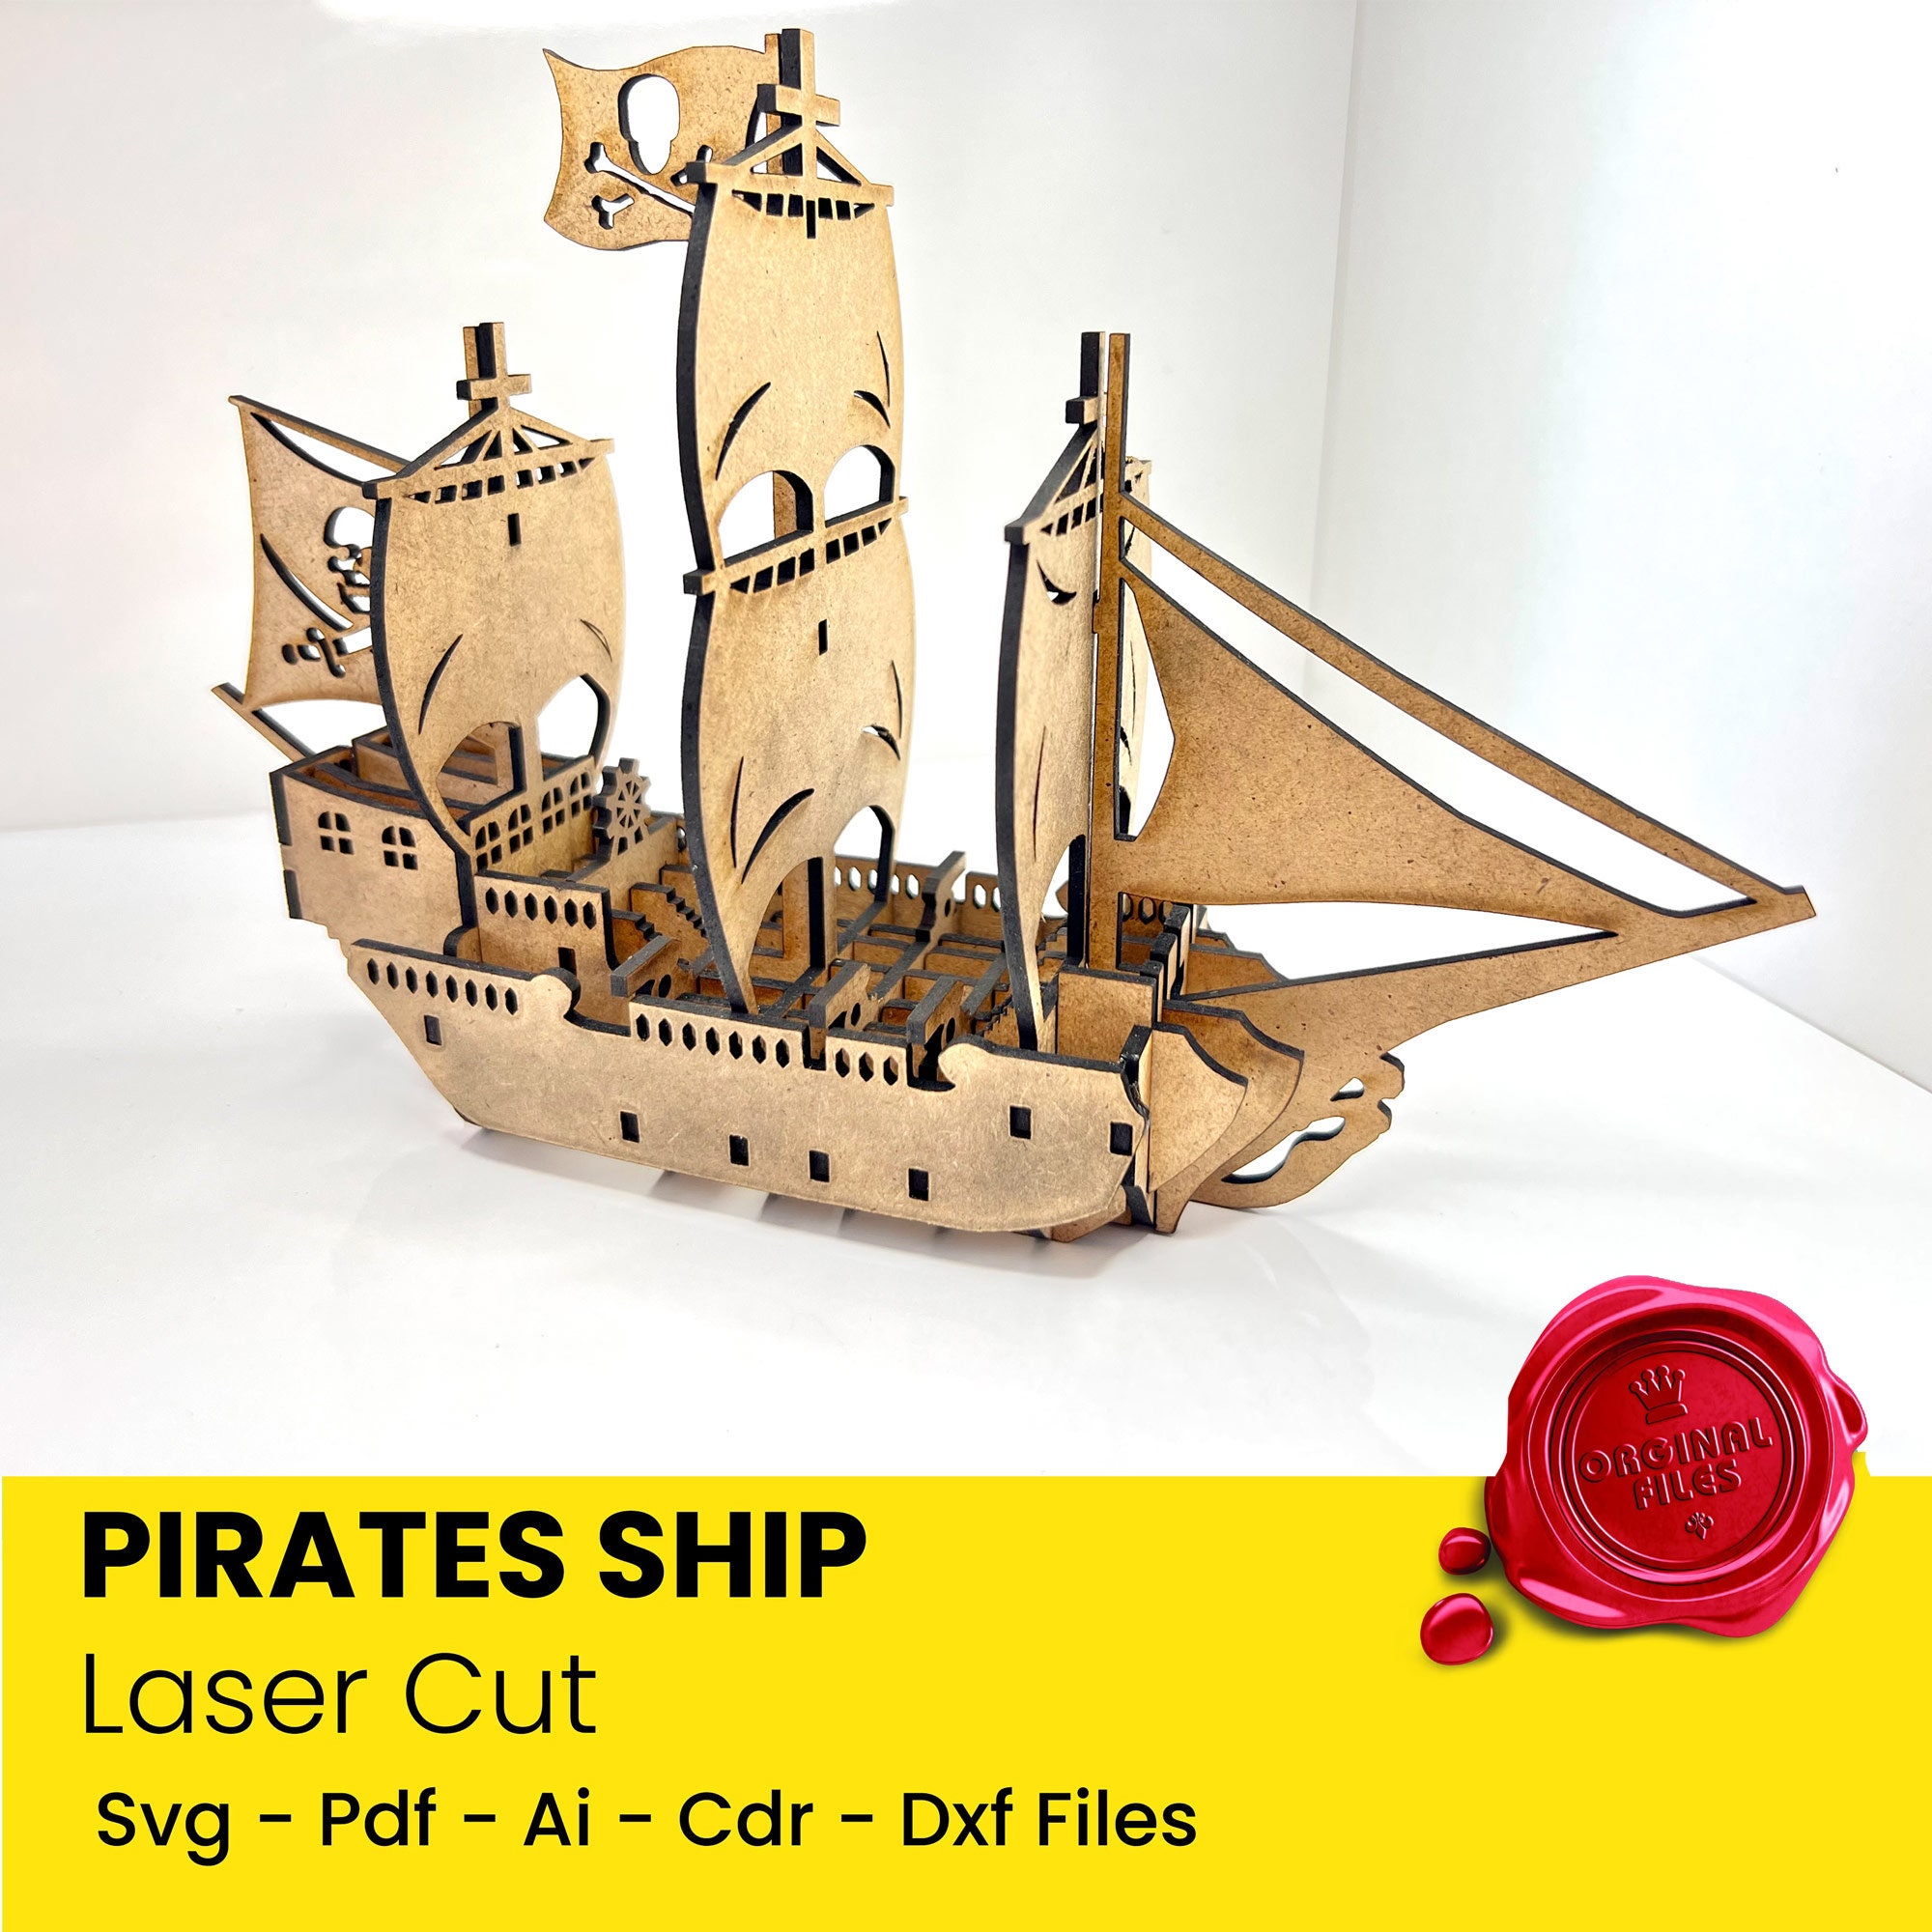 Ship Model Ship Pirate Ship Plastic From One Collection 8 5/16x7 1/2in